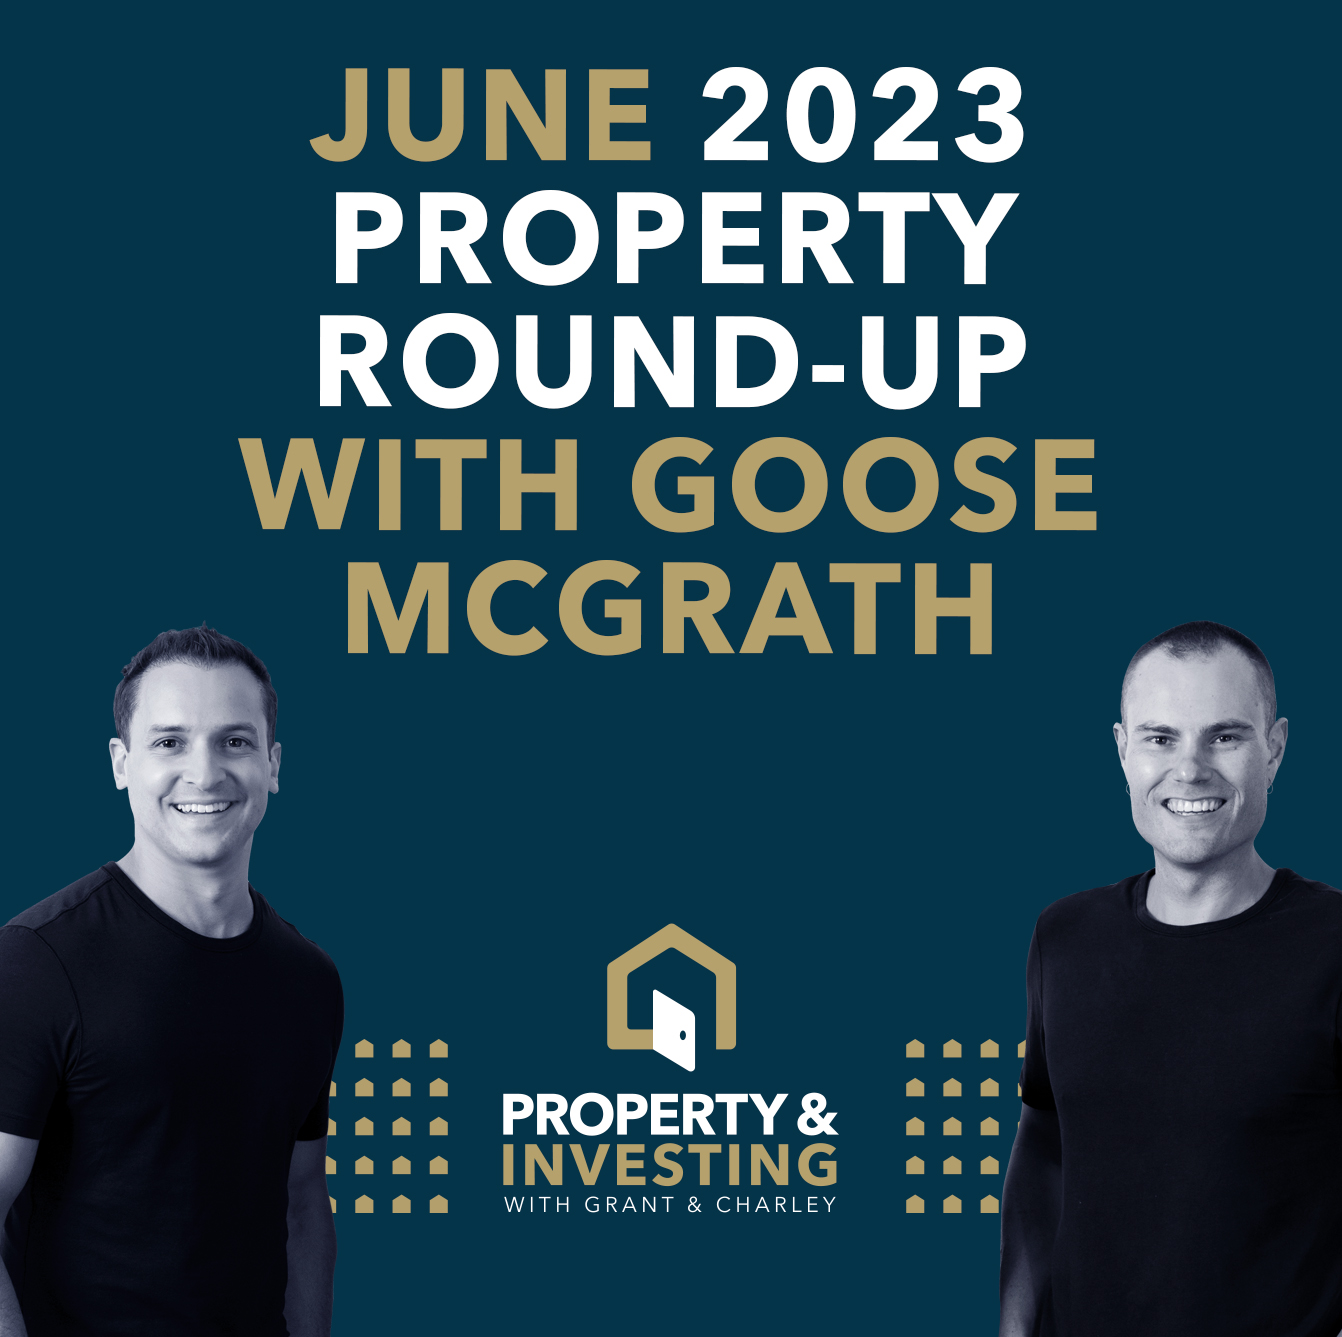 June 2023 Property Round-Up with Goose McGrath